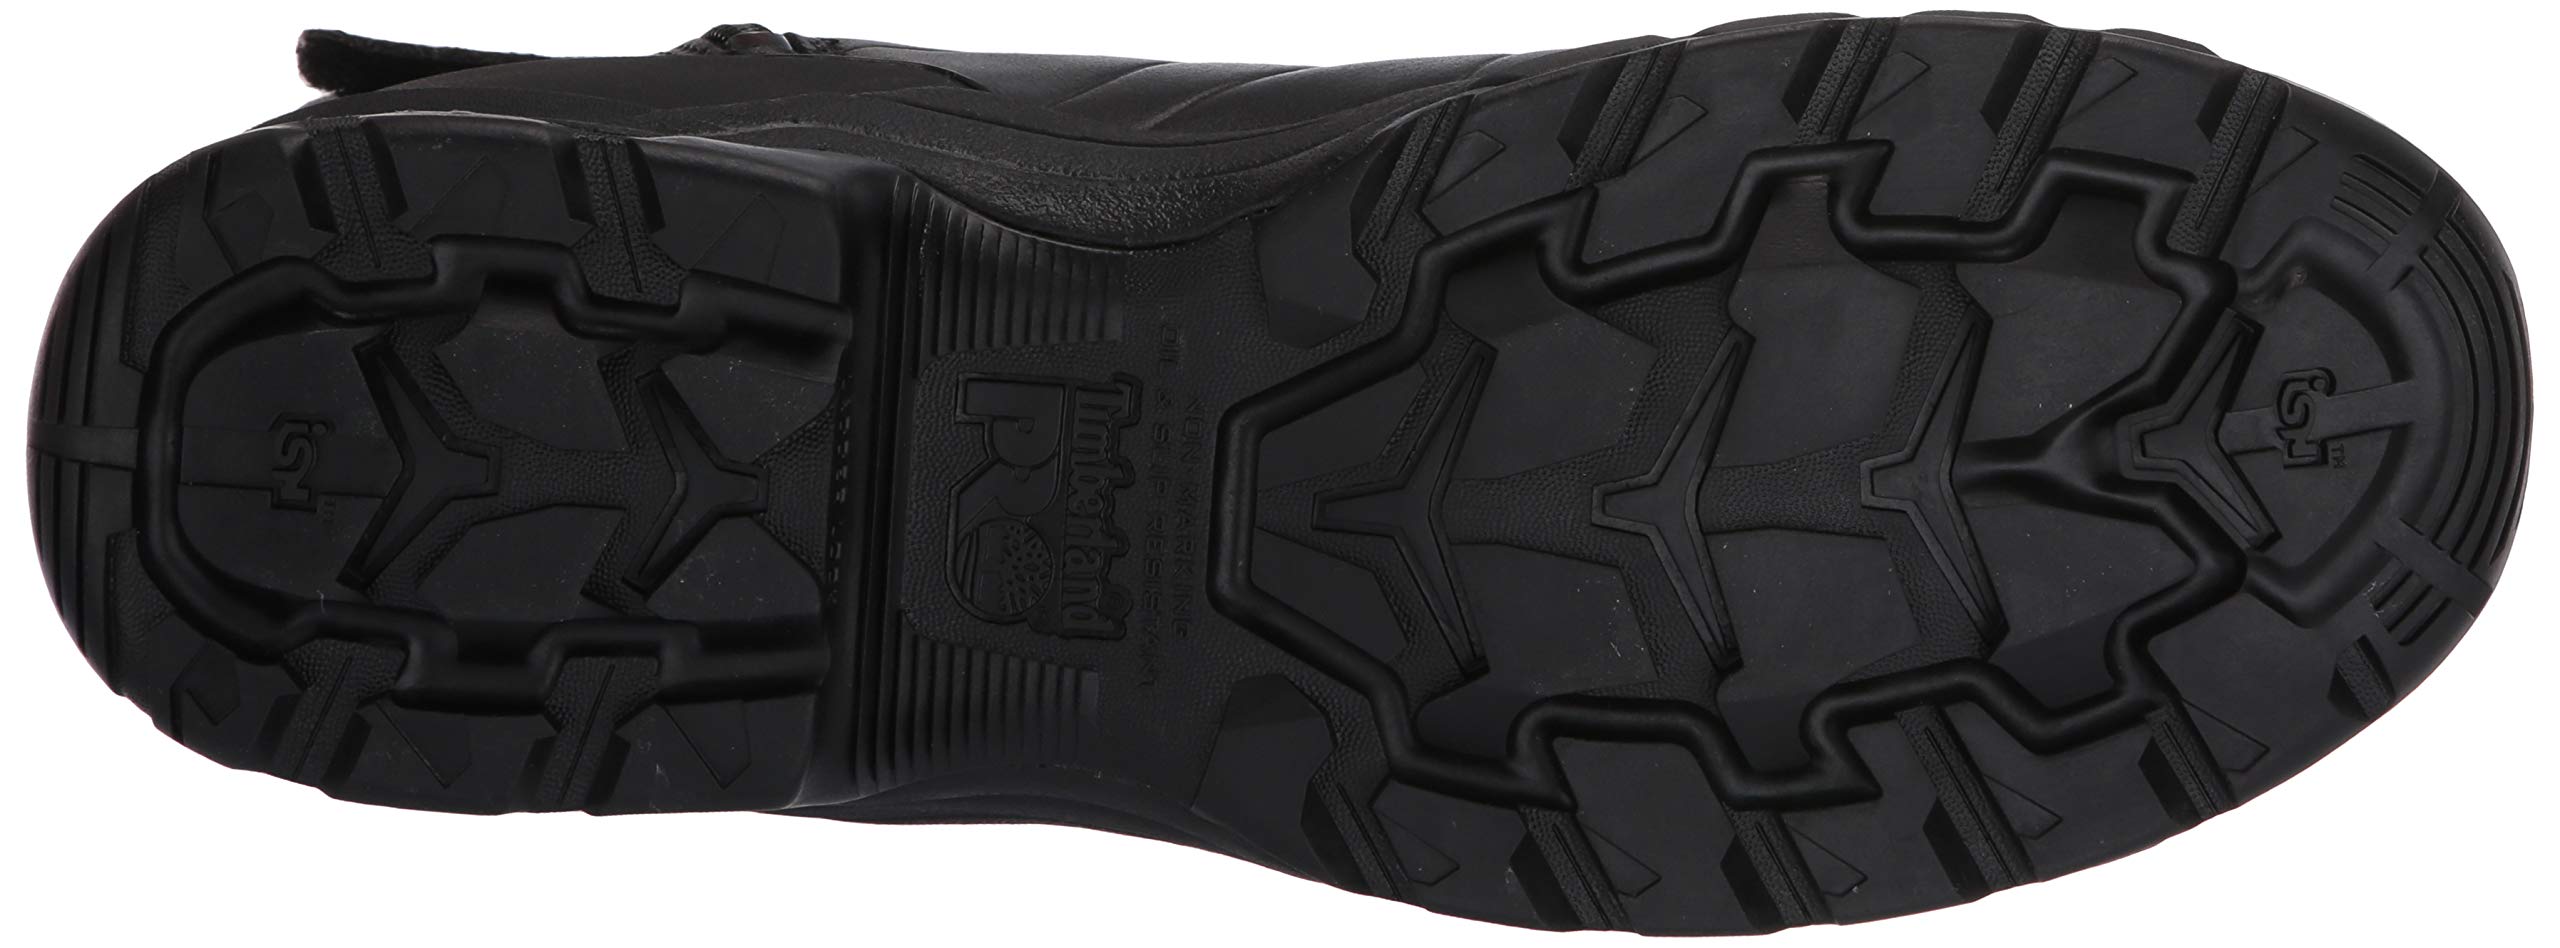 Timberland PRO Hypercharge, Men's, Black, Comp Toe, EH, PR, WP, 6 Inch